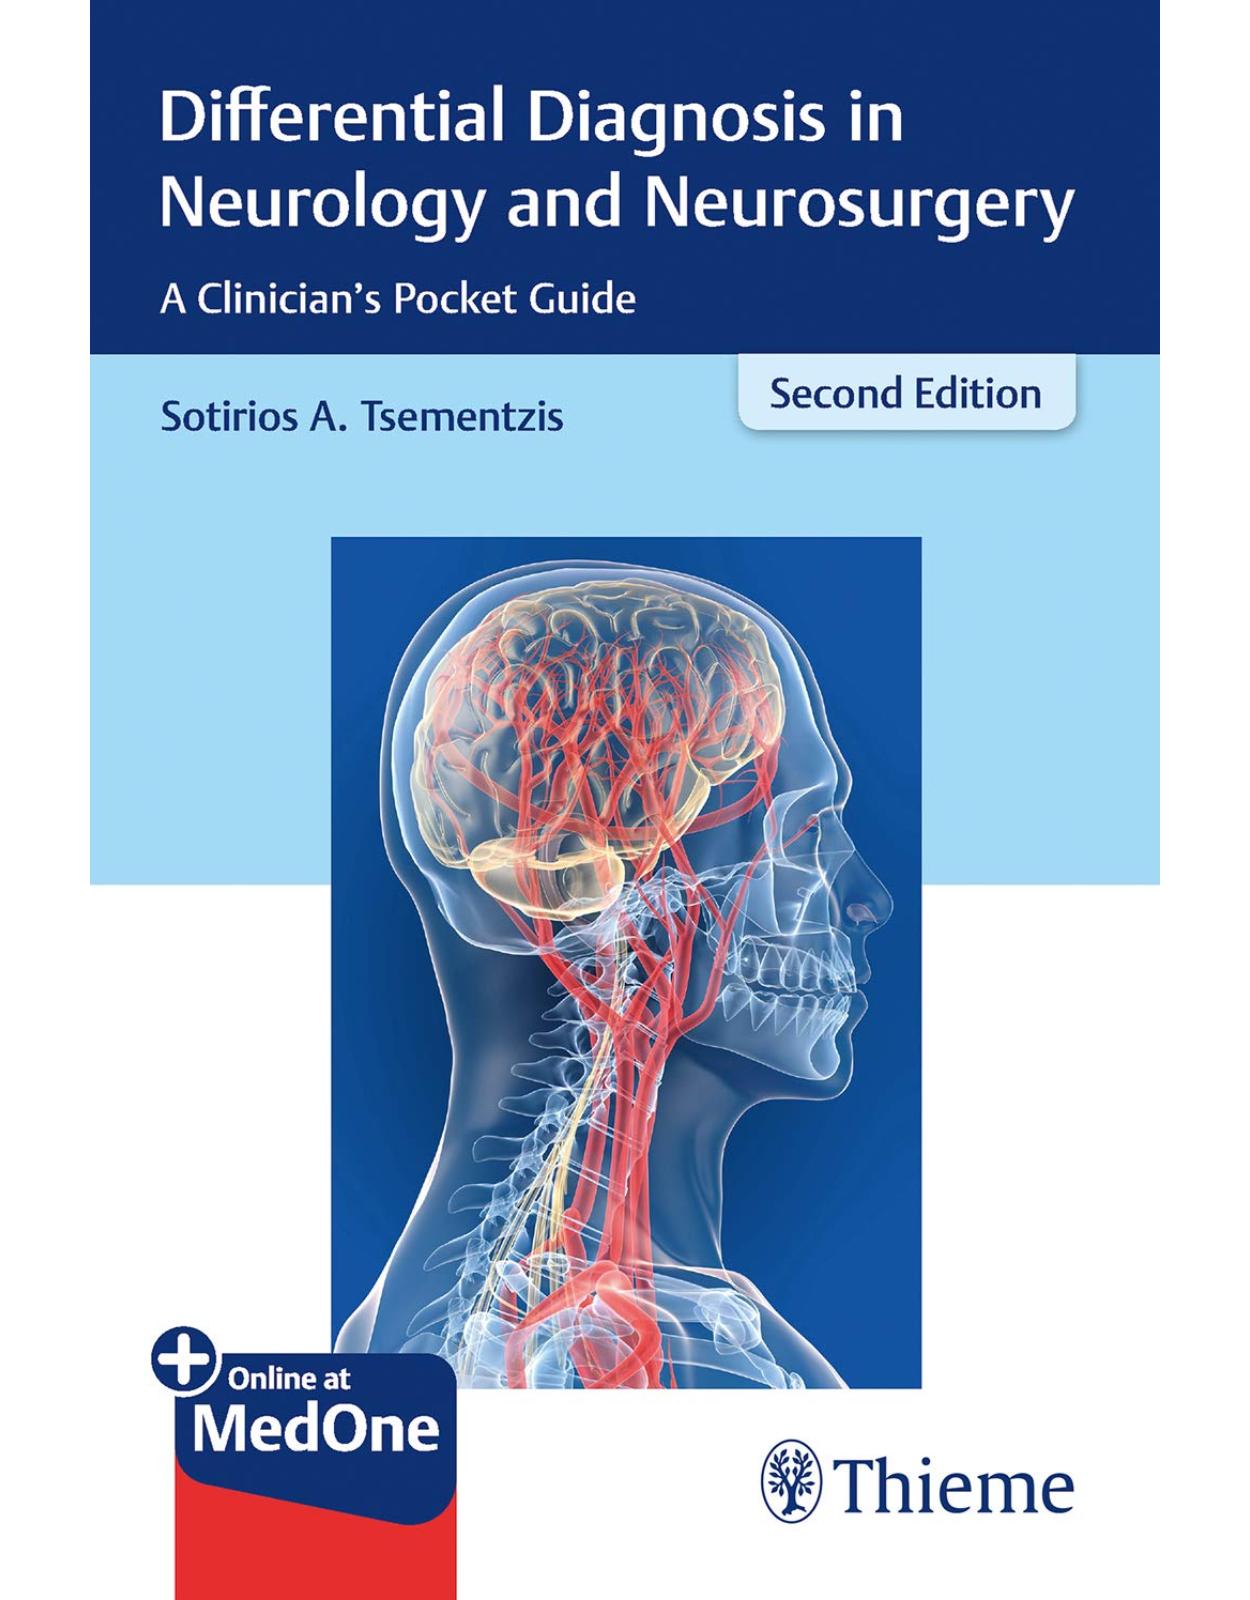 Differential Diagnosis in Neurology and Neurosurgery: A Clinician’s Pocket Guide